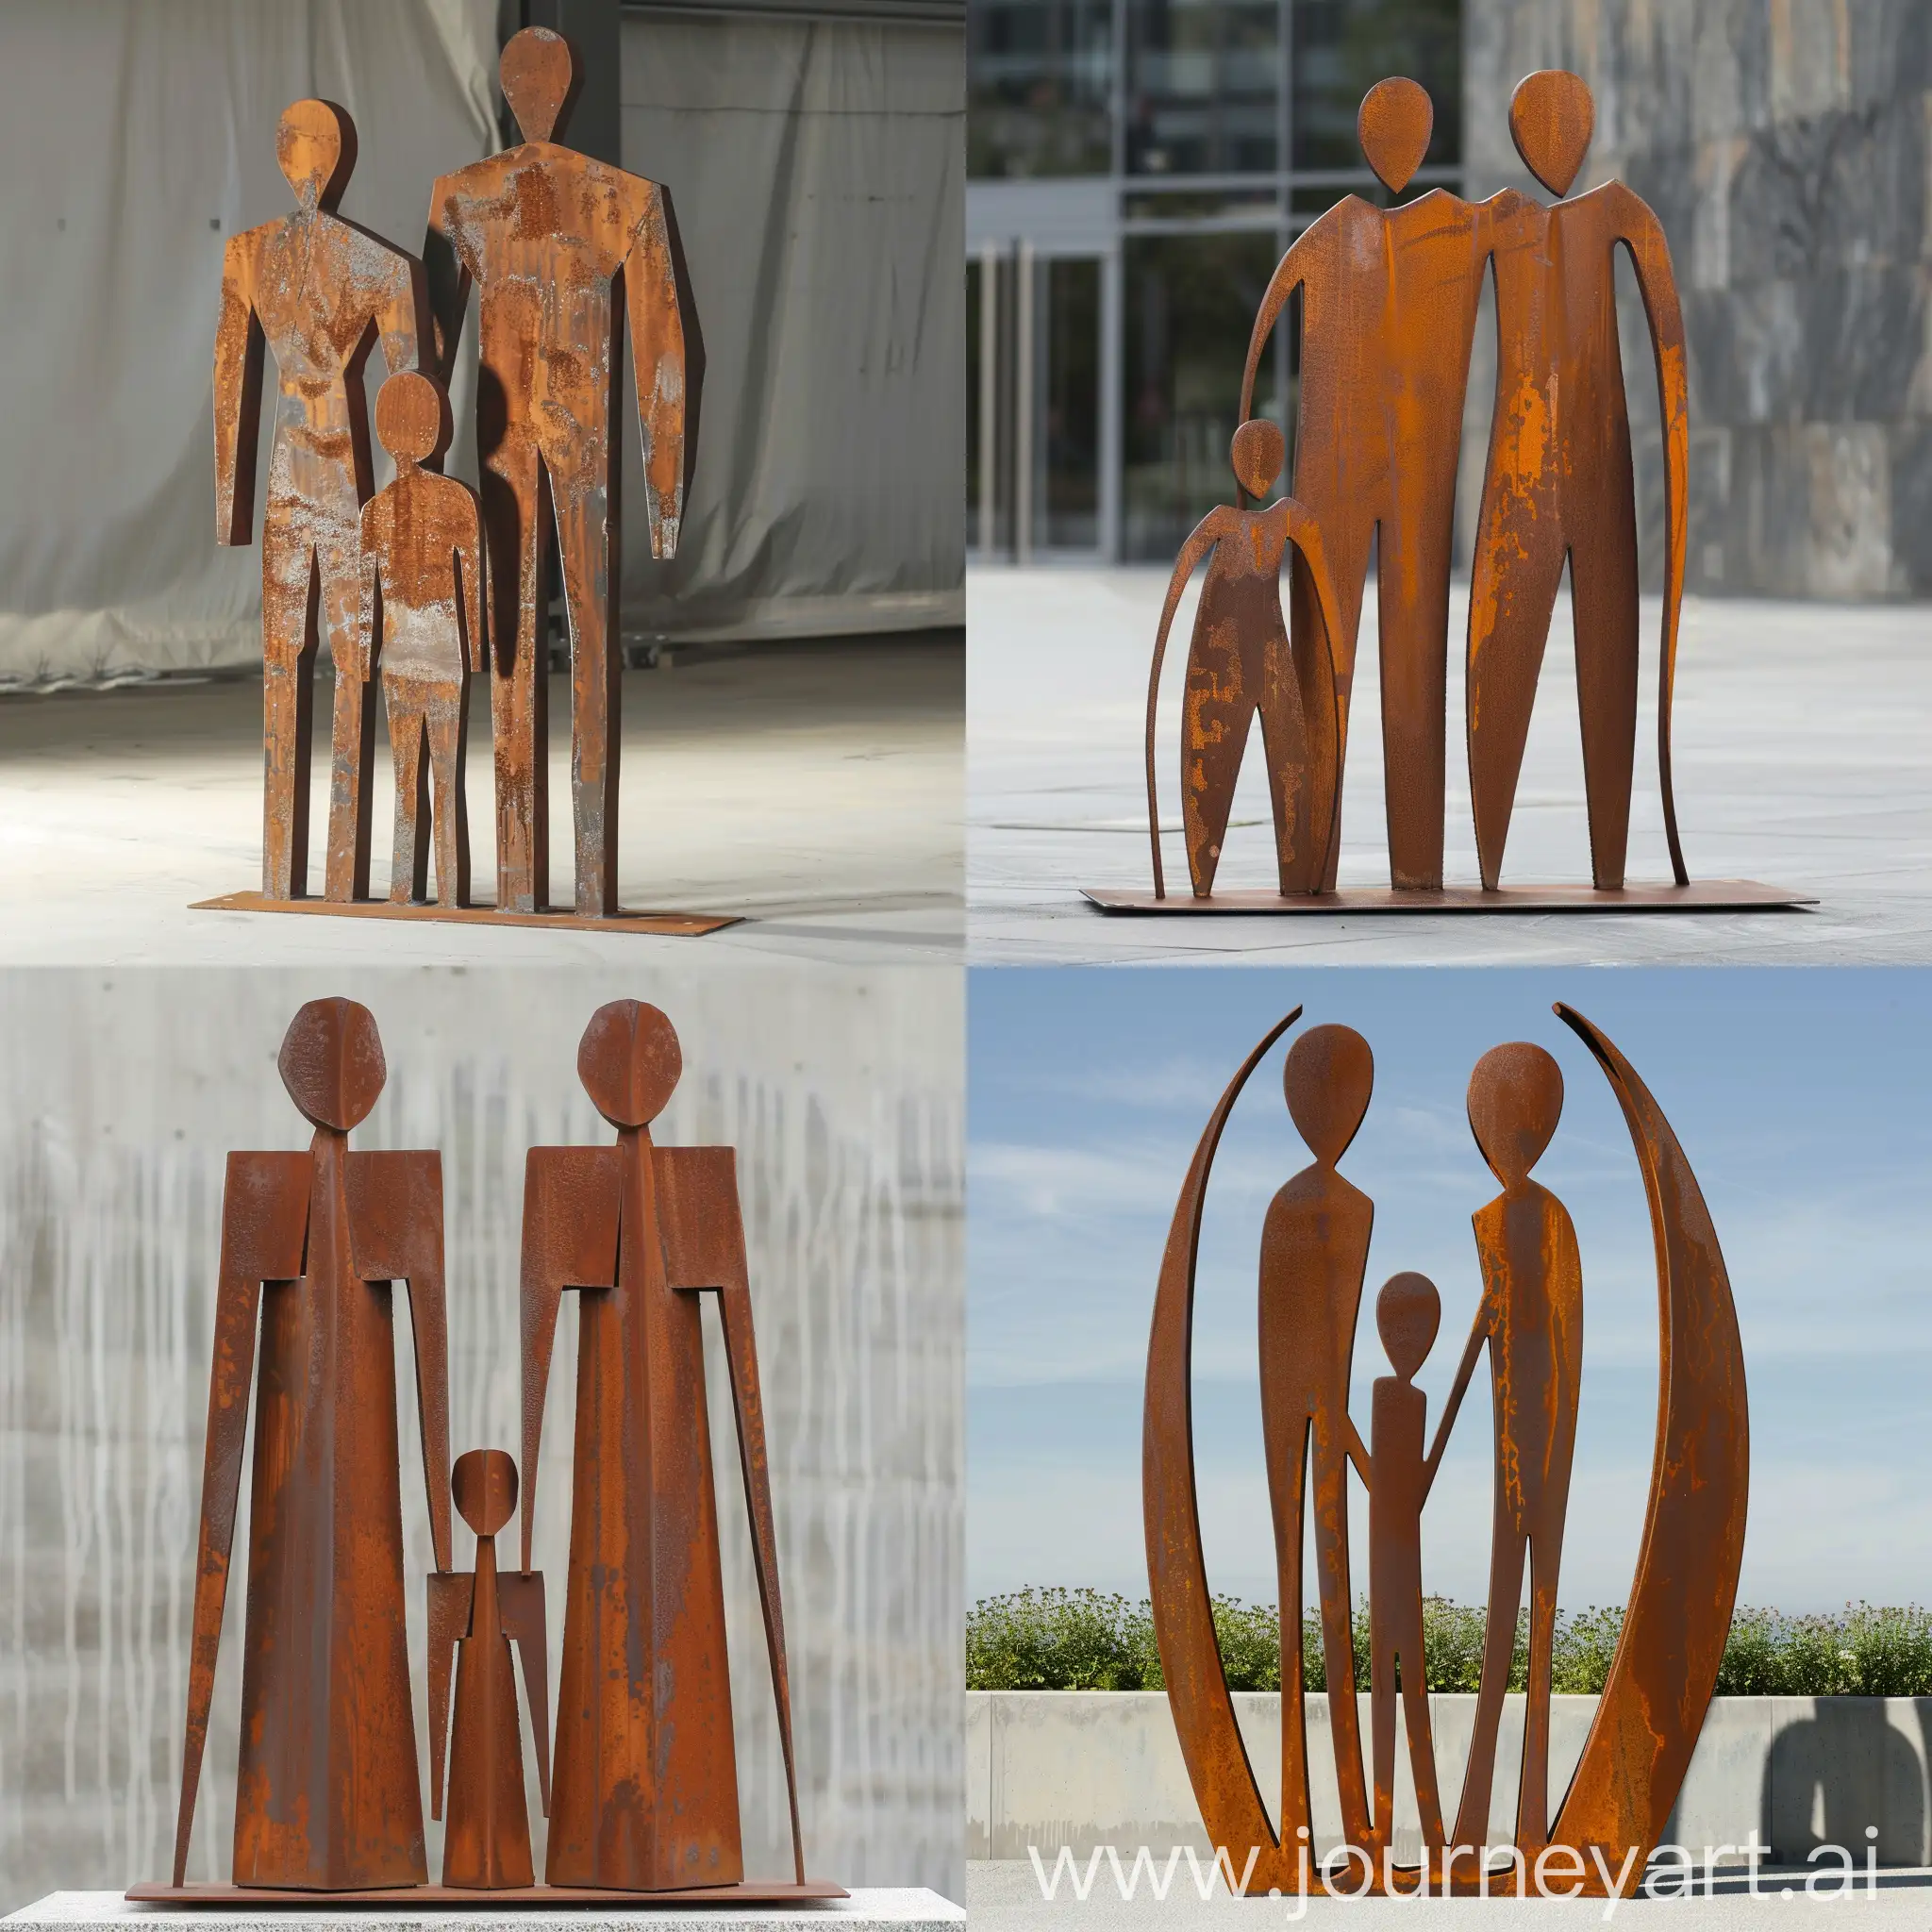 Figurative for people, two adults, two children, mild steel, rusty, 4 m high 1.6 m wide, public art public sculpture